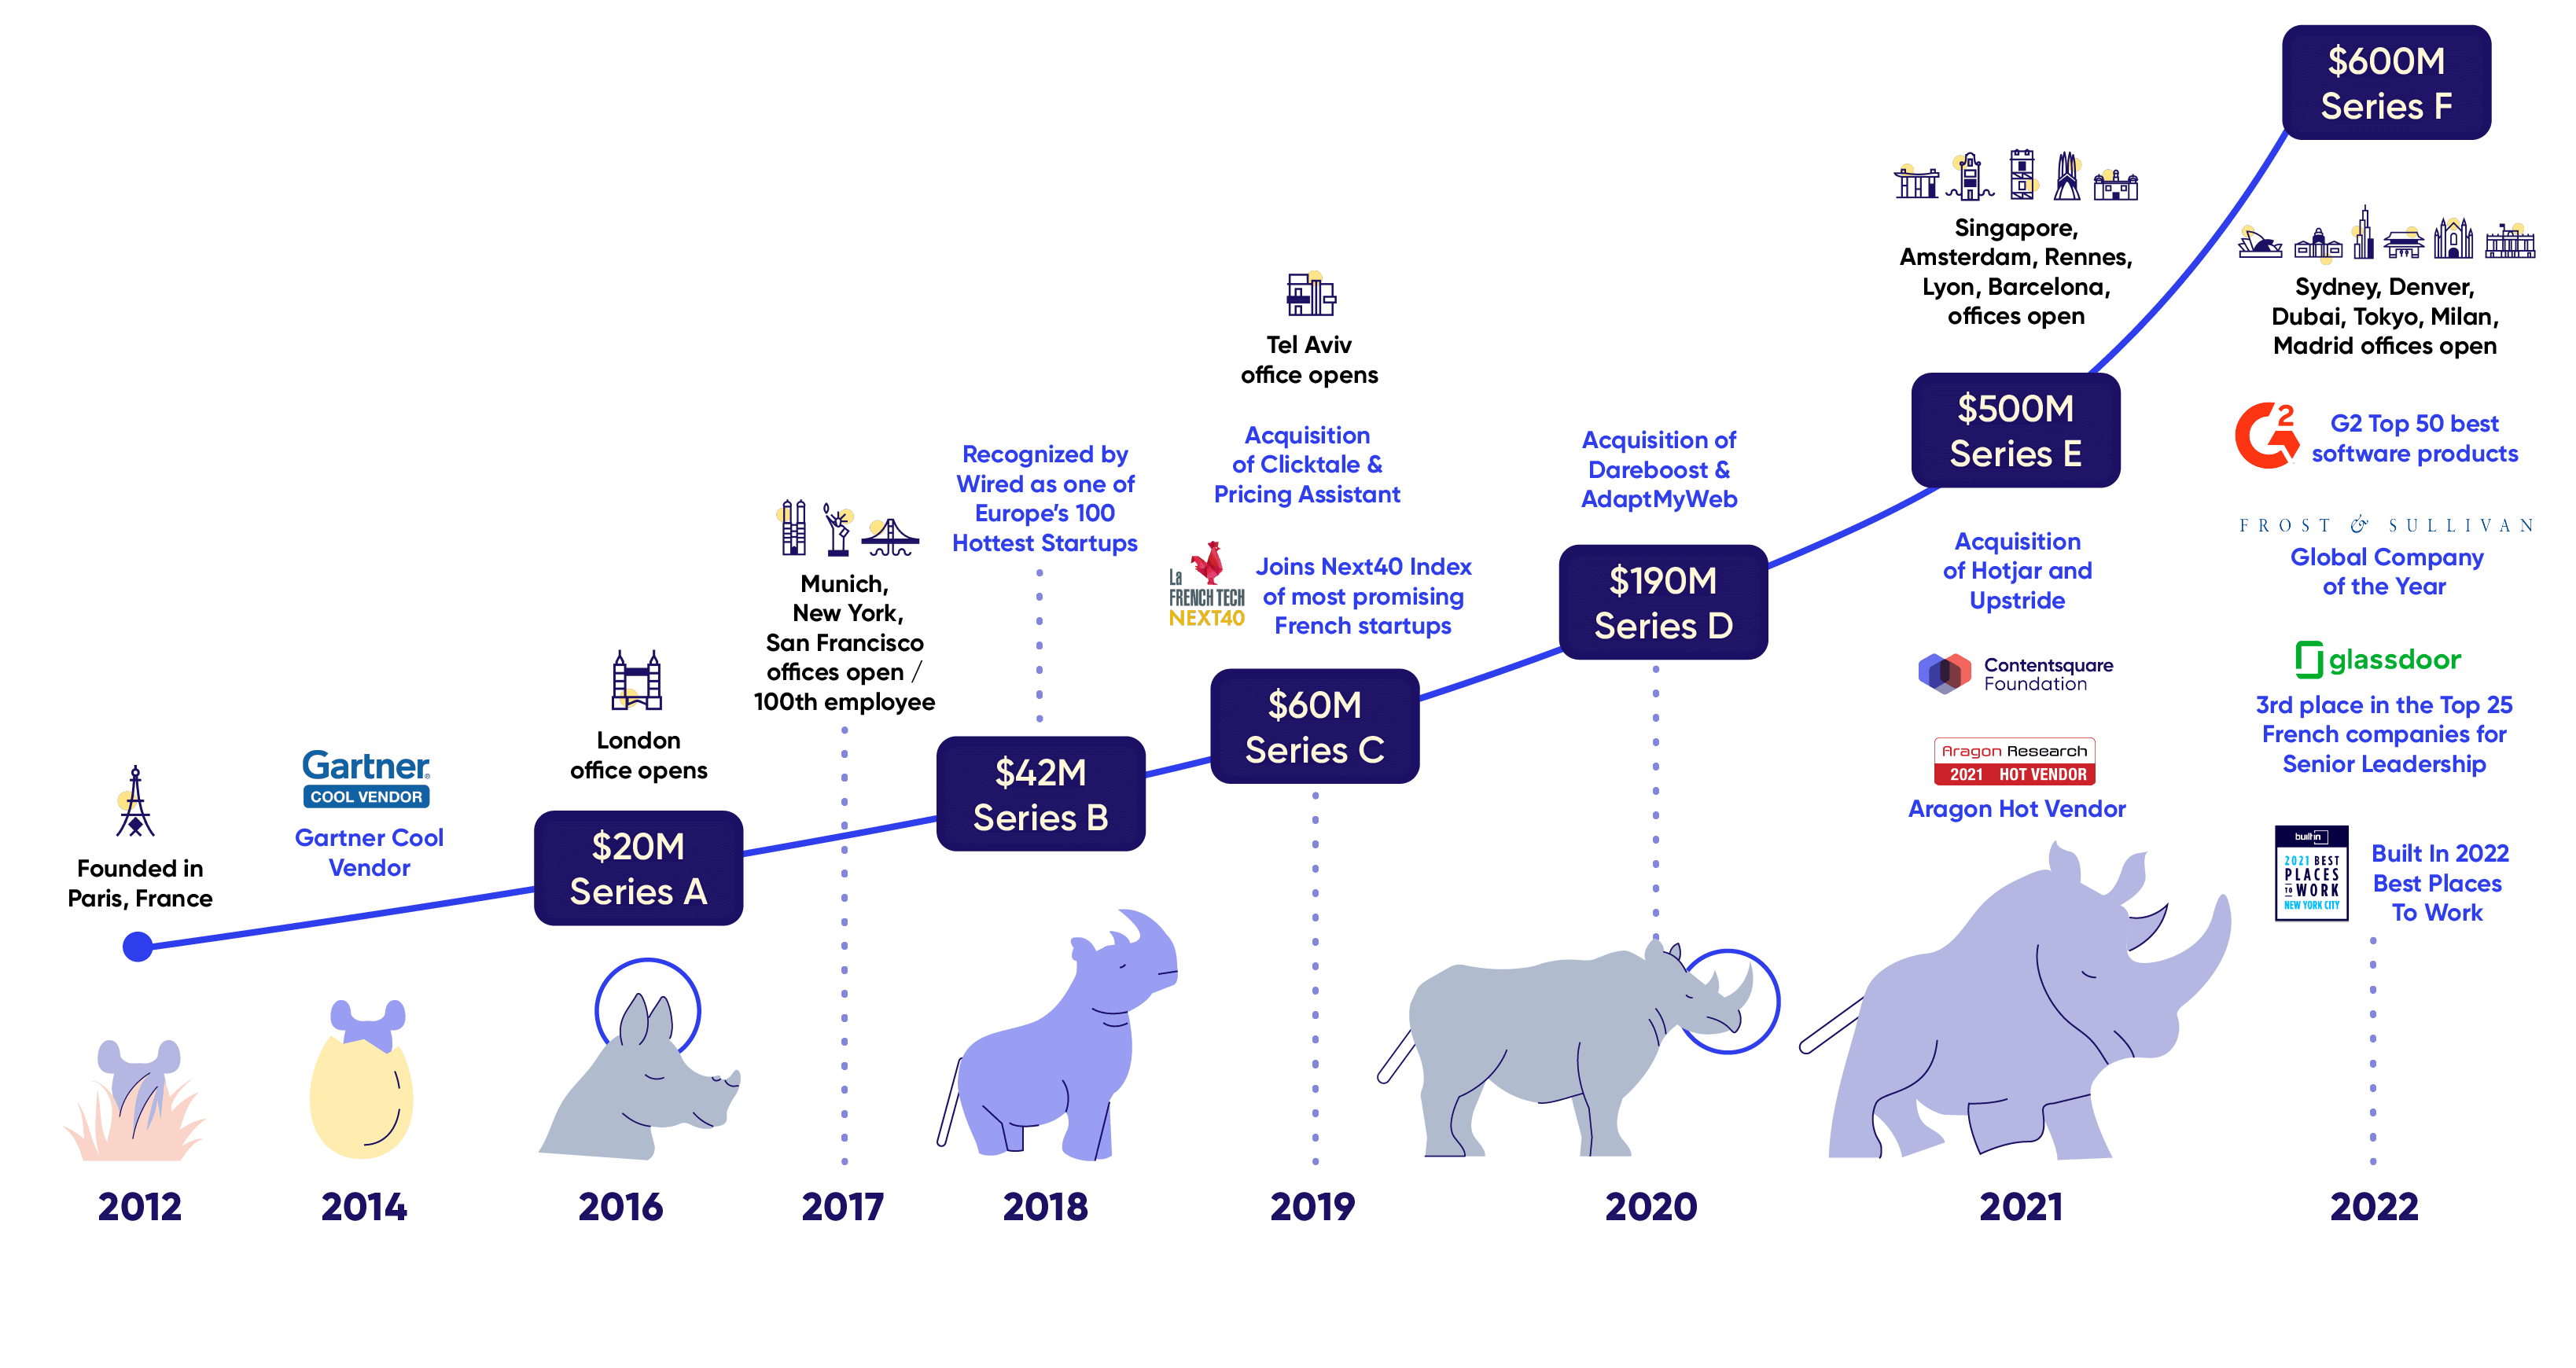 A decade timeline view of Contentsquare